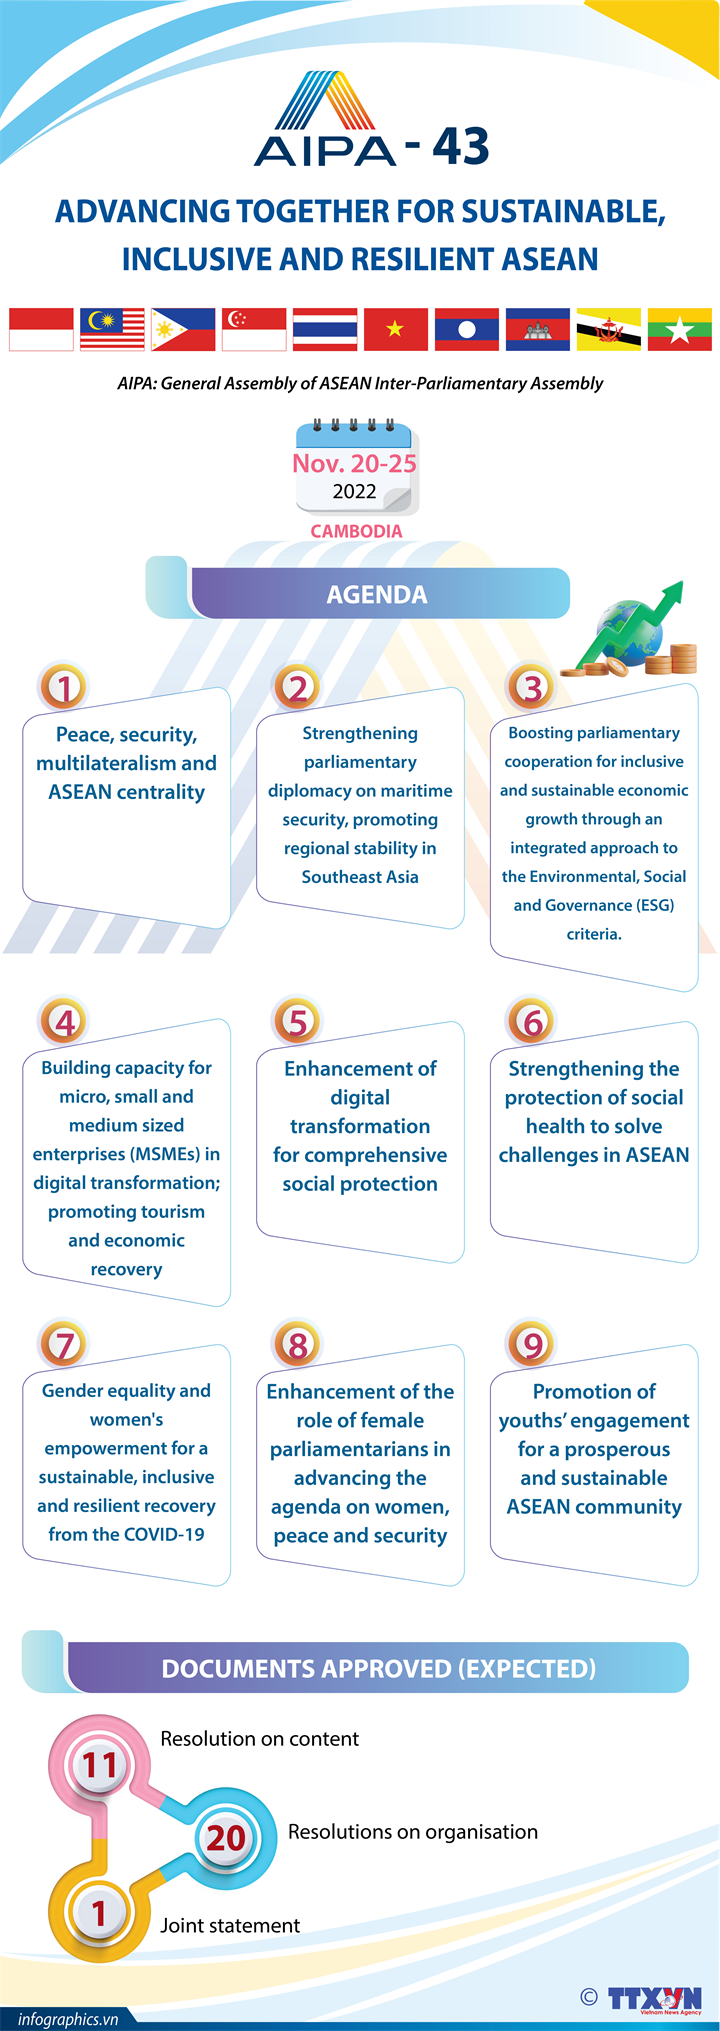 AIPA-43: Advancing together for sustainable, inclusive and resilient ASEAN